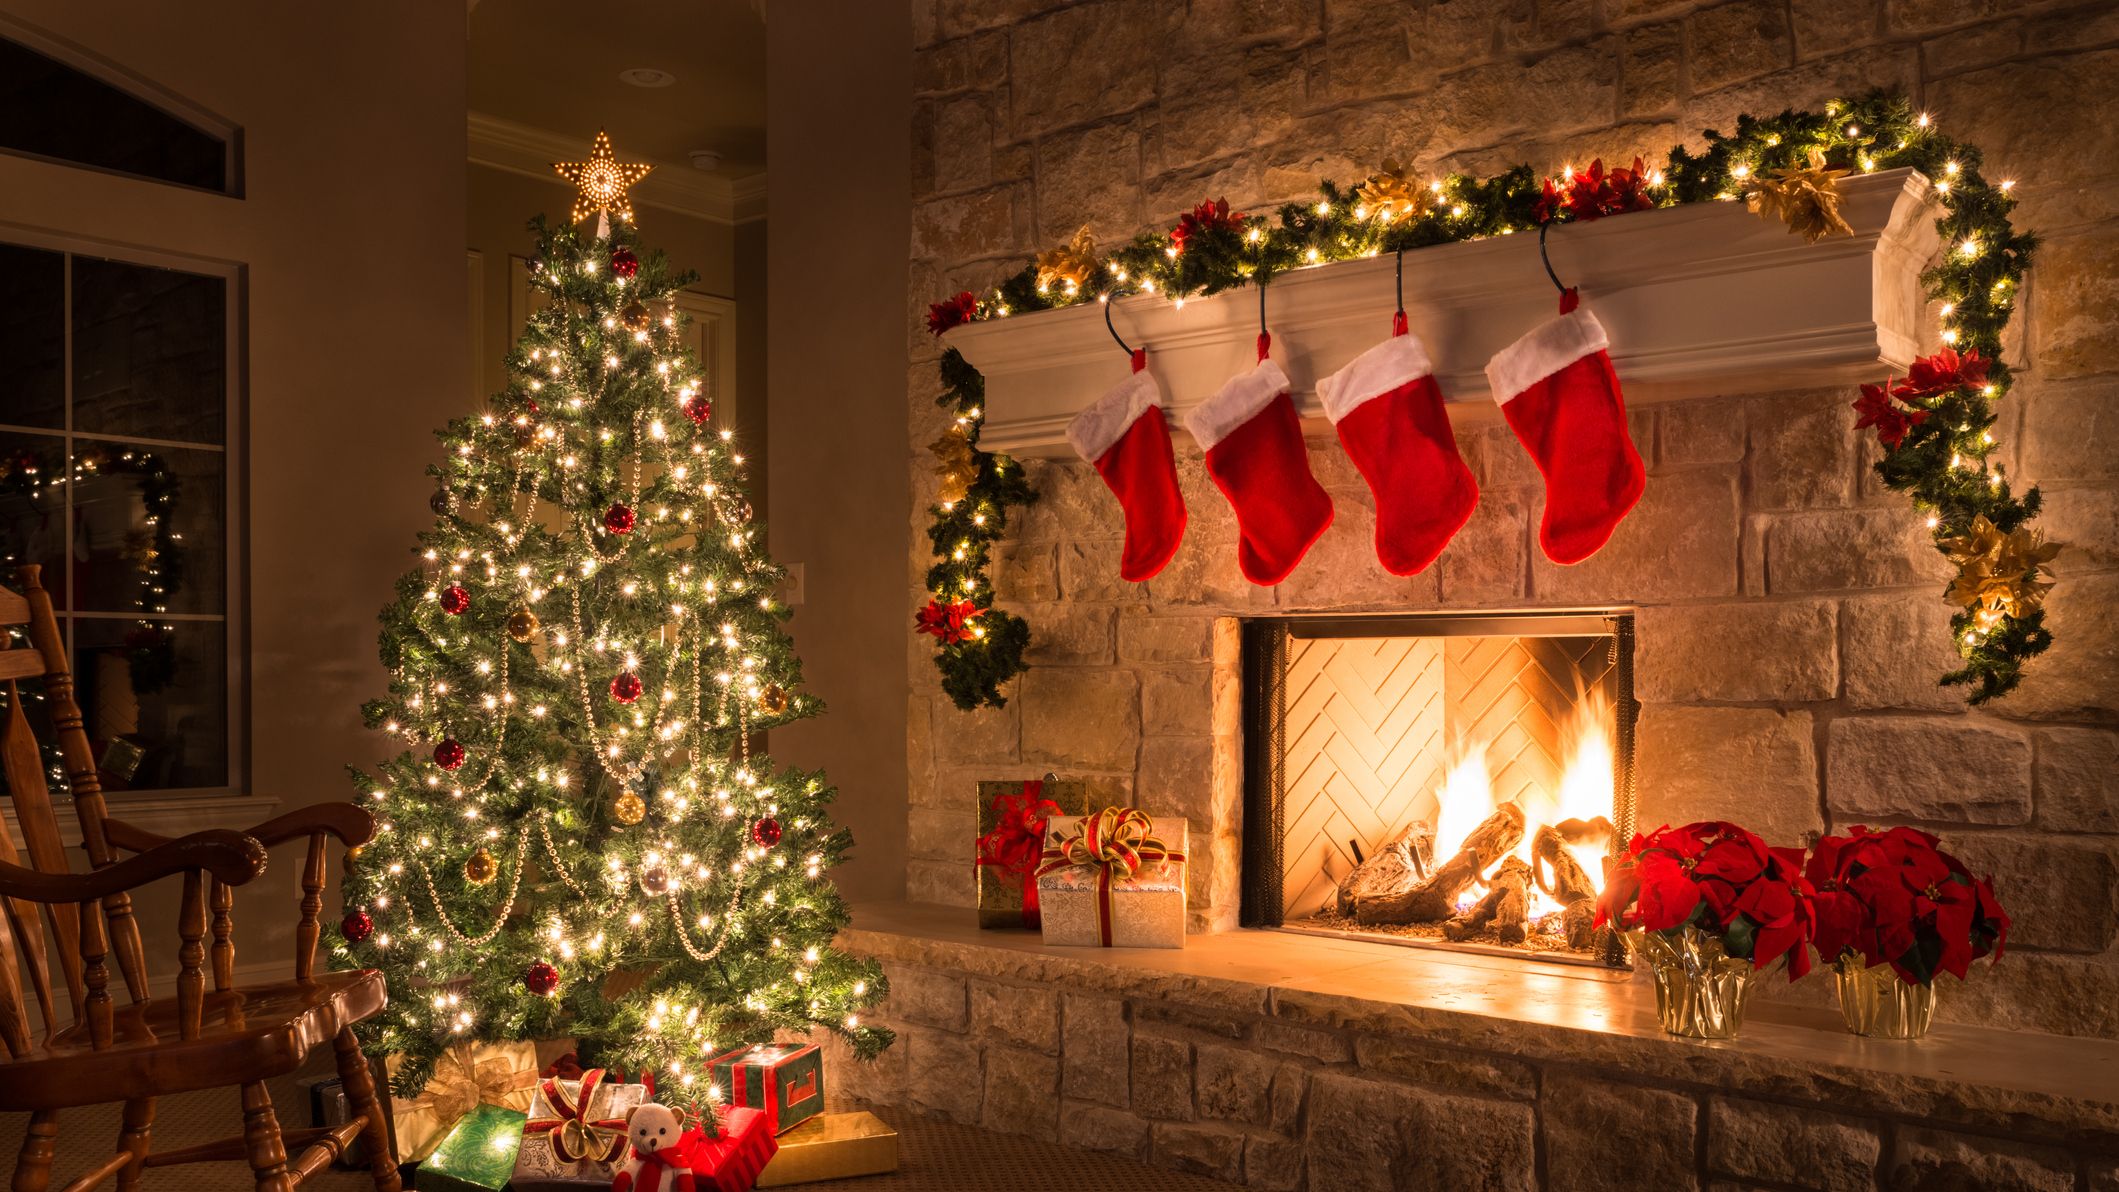 https://hips.hearstapps.com/hmg-prod/images/christmas-glowing-fireplace-hearth-tree-red-royalty-free-image-1605717889.?crop=1xw:0.84296xh;center,top